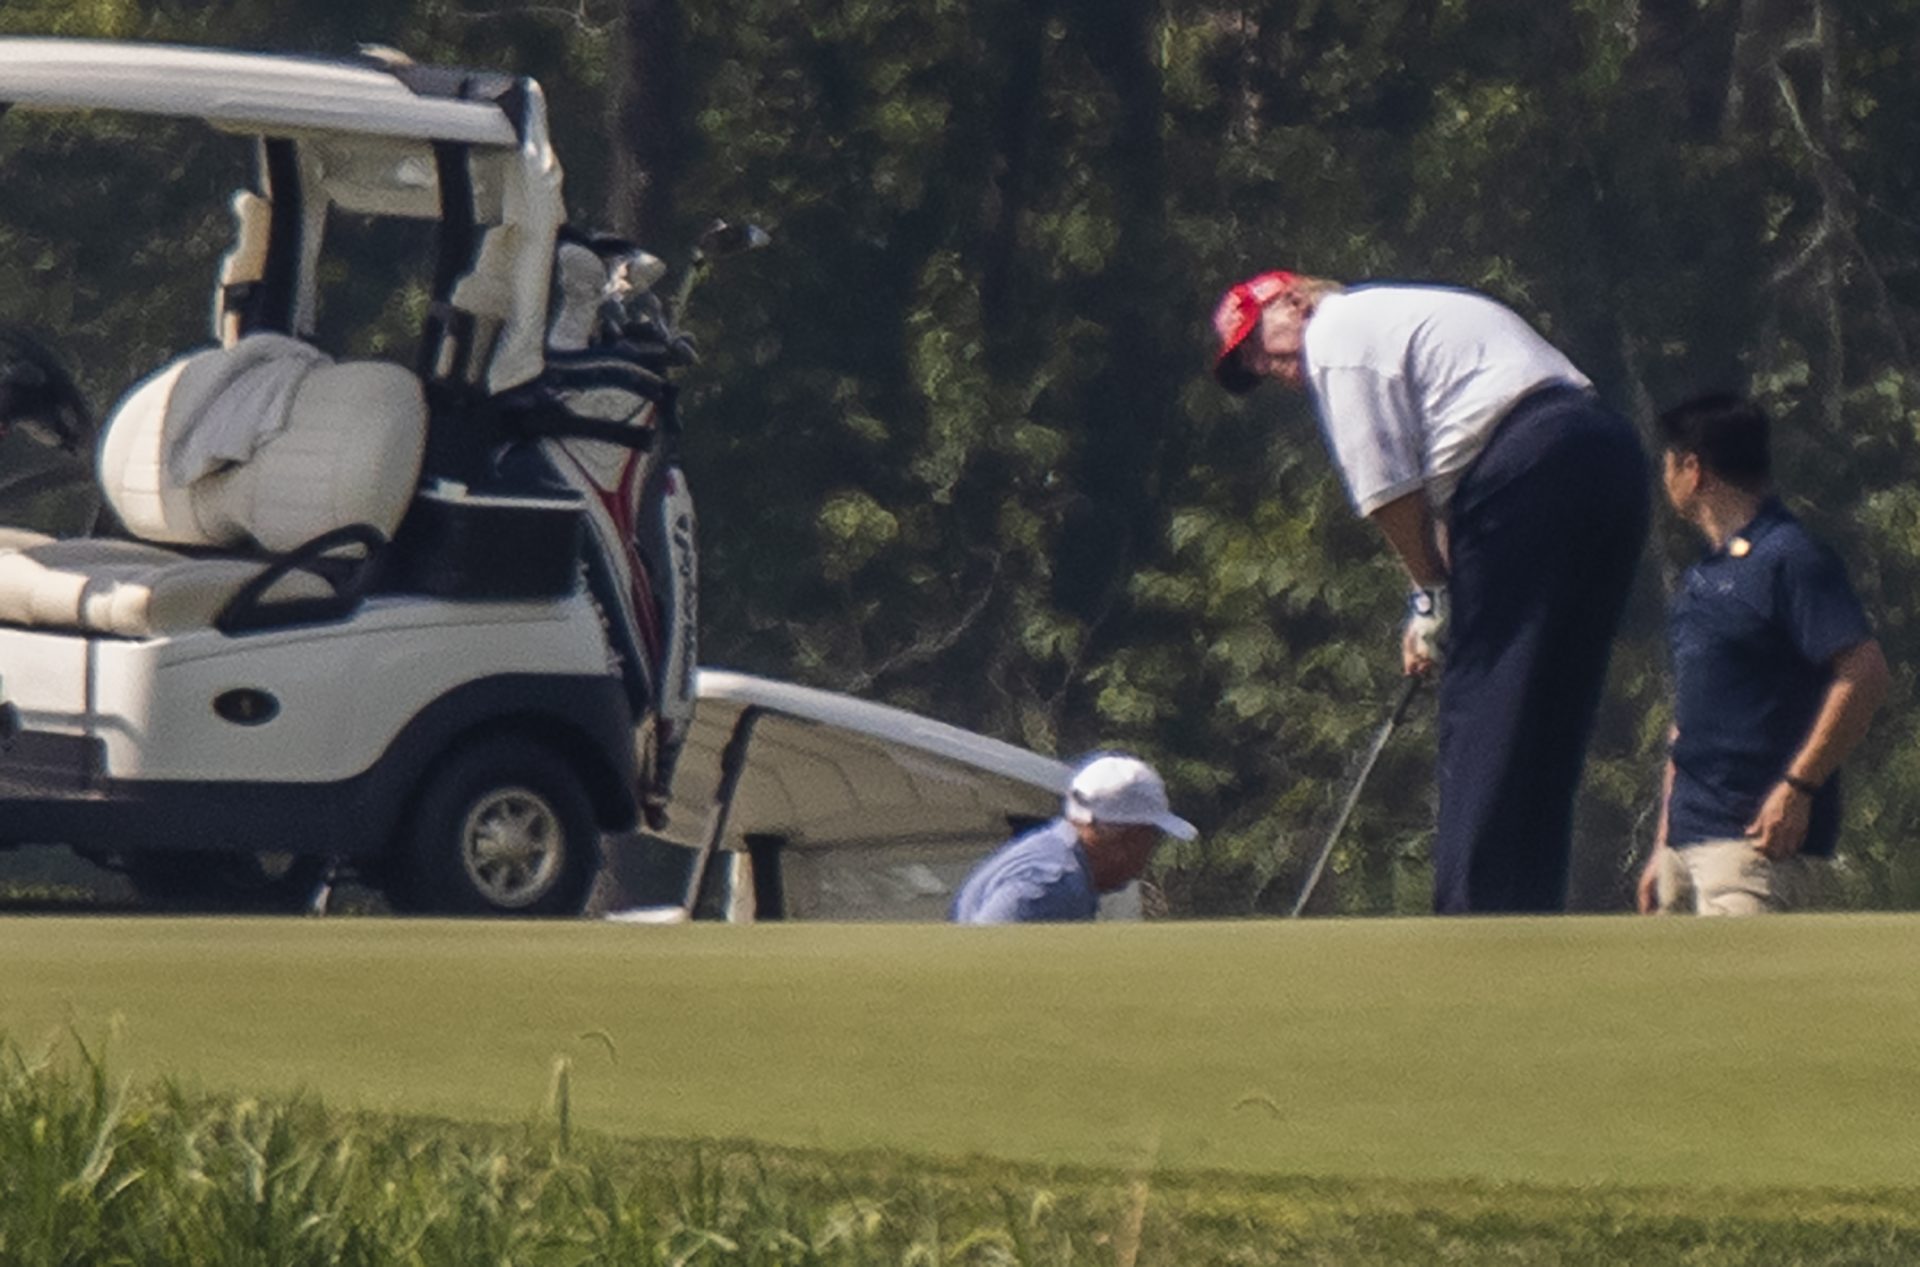 President Donald Trump and Sen. Lindsey Graham, R-S.C., back light blue shirt, play golf at Trump National Golf Club in Sterling, Va., as seen from the other side of the Potomac River in Darnestown, Md., Sunday, July 19, 2020.